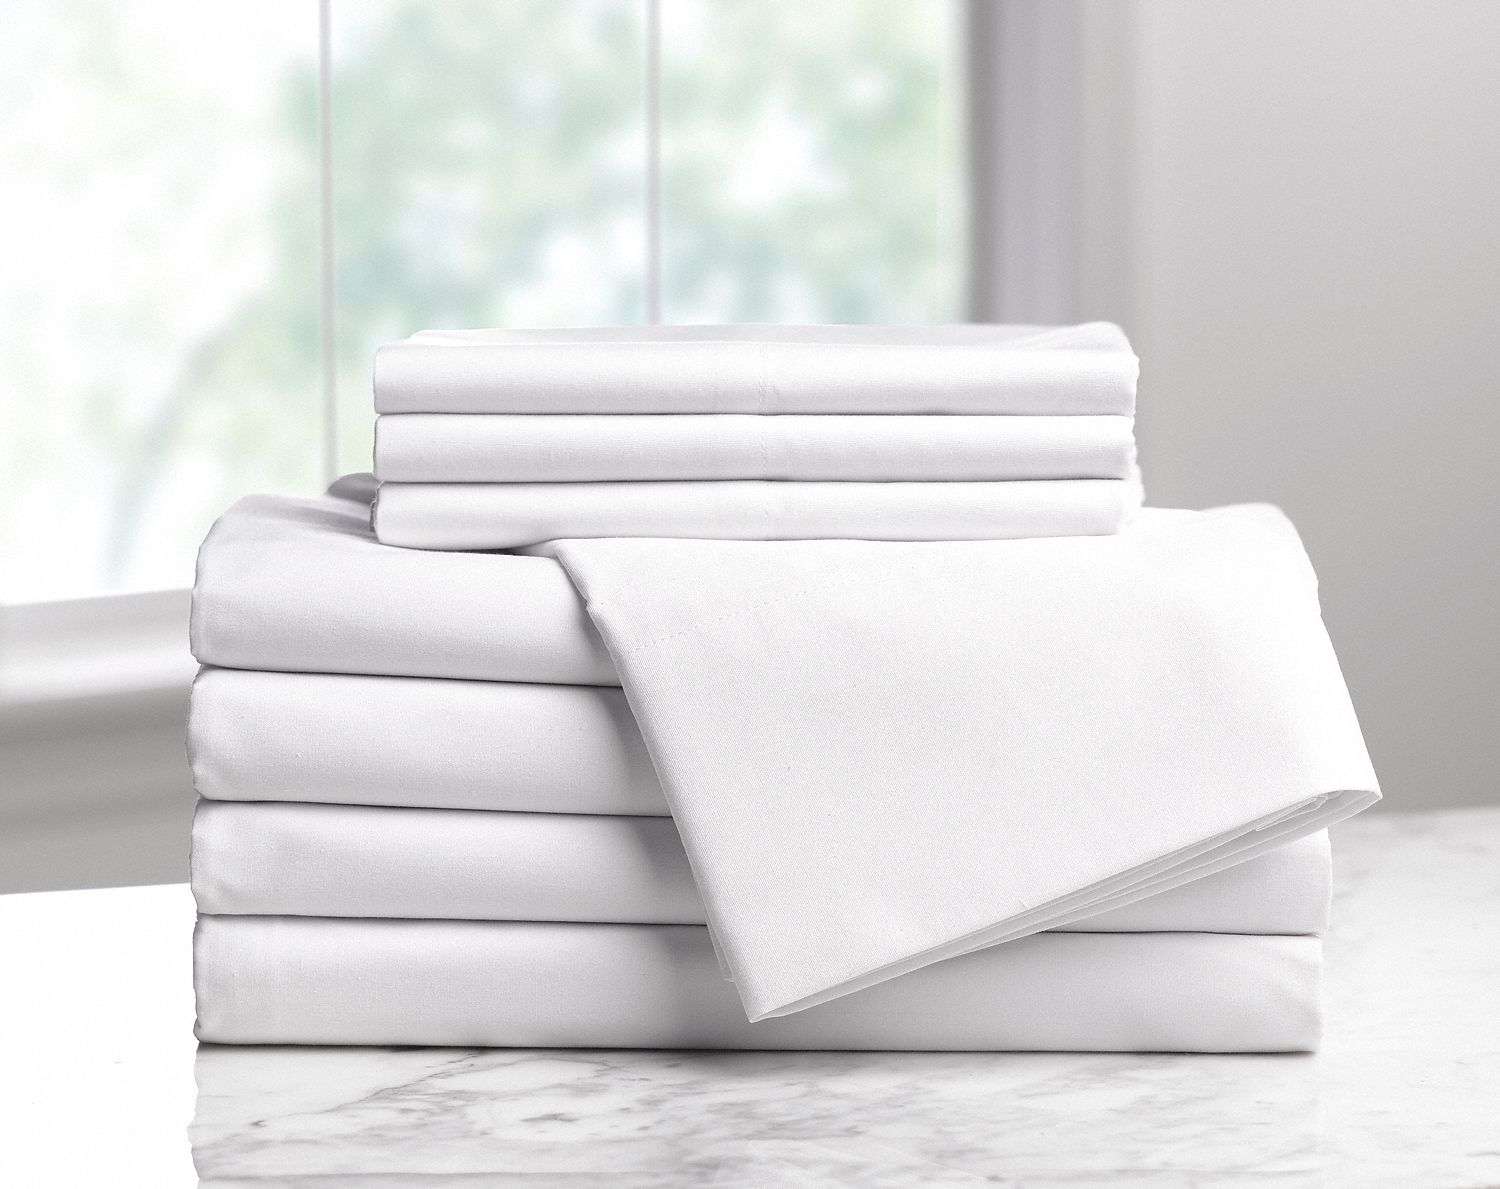 Fitted Sheet: Fitted, King, 78 in Wd, 80 in Lg, 60% Cotton/40% Polyester Fabric, T200, 6 PK